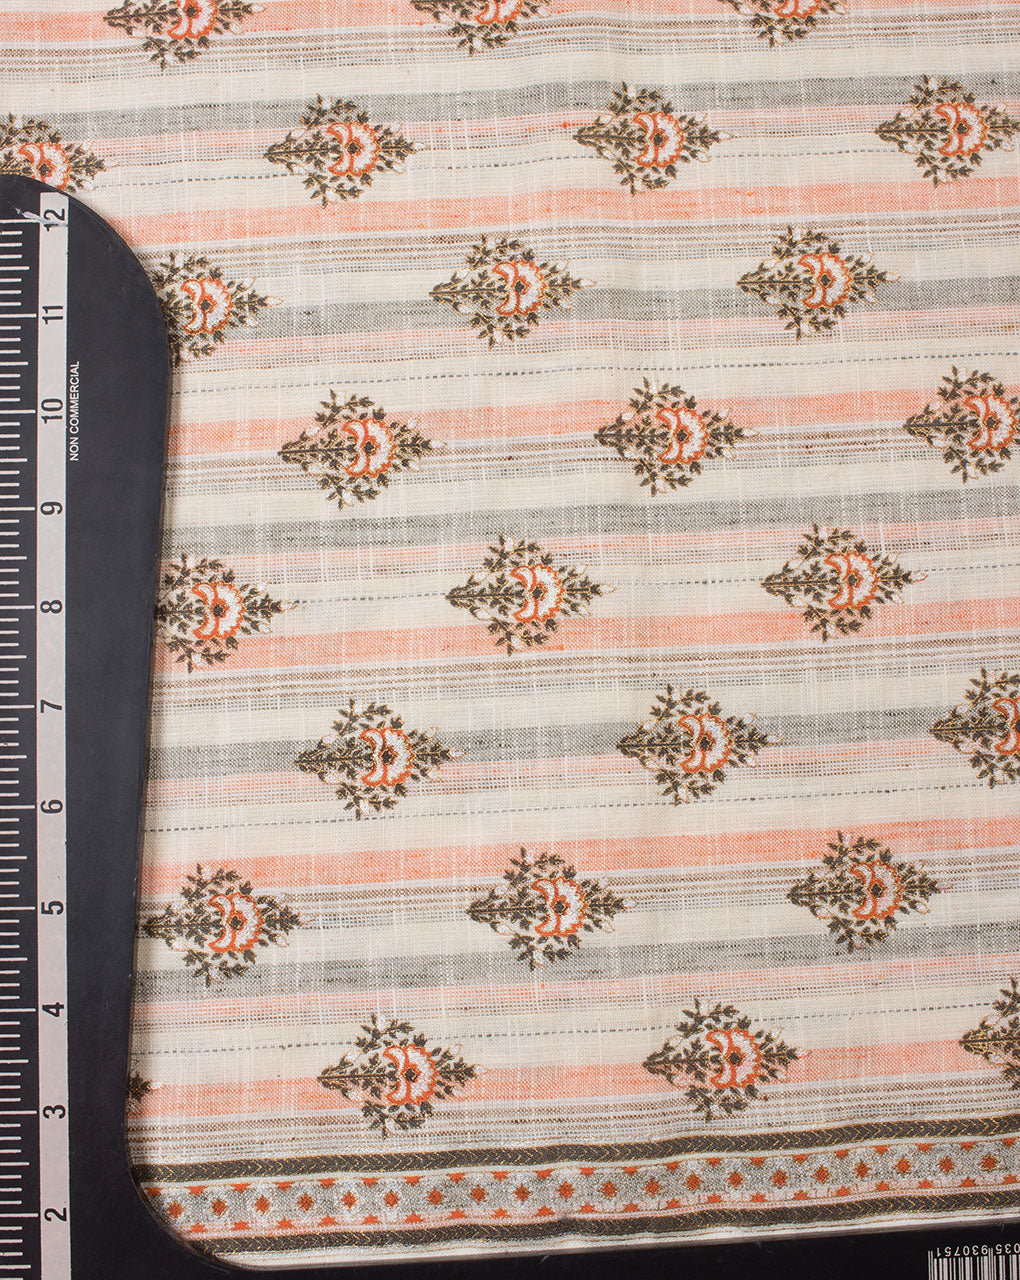 Off-White Brown Floral Woven Loom Textured Borderd Foil Screen Print Cotton Fabric - Fabriclore.com